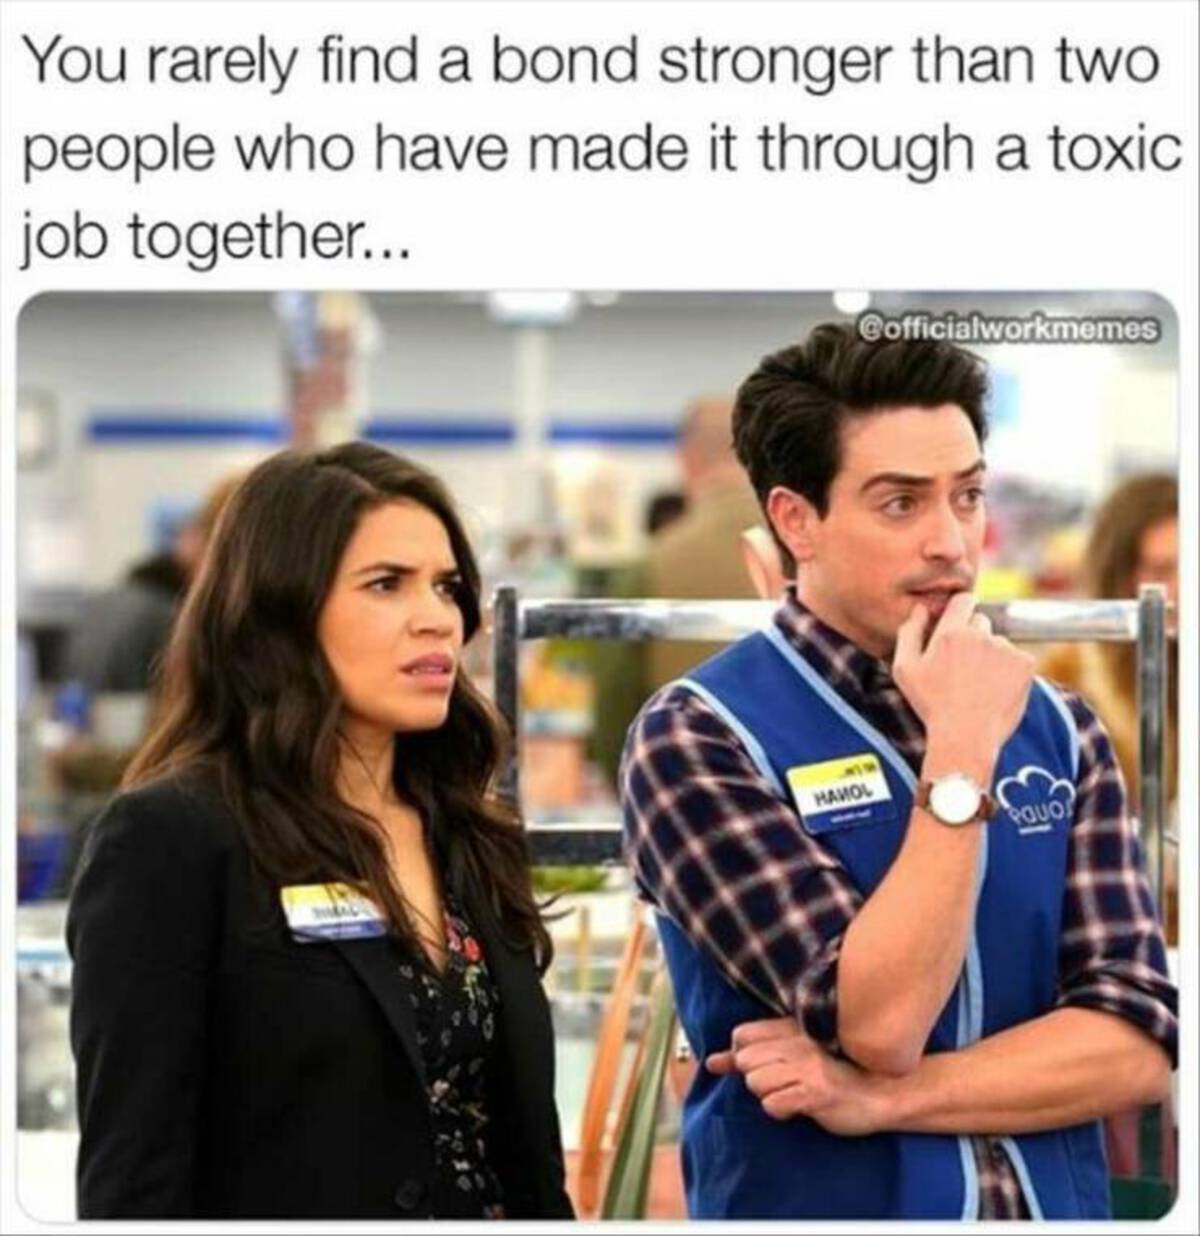 conversation - You rarely find a bond stronger than two people who have made it through a toxic job together... Cofficialworkmemes